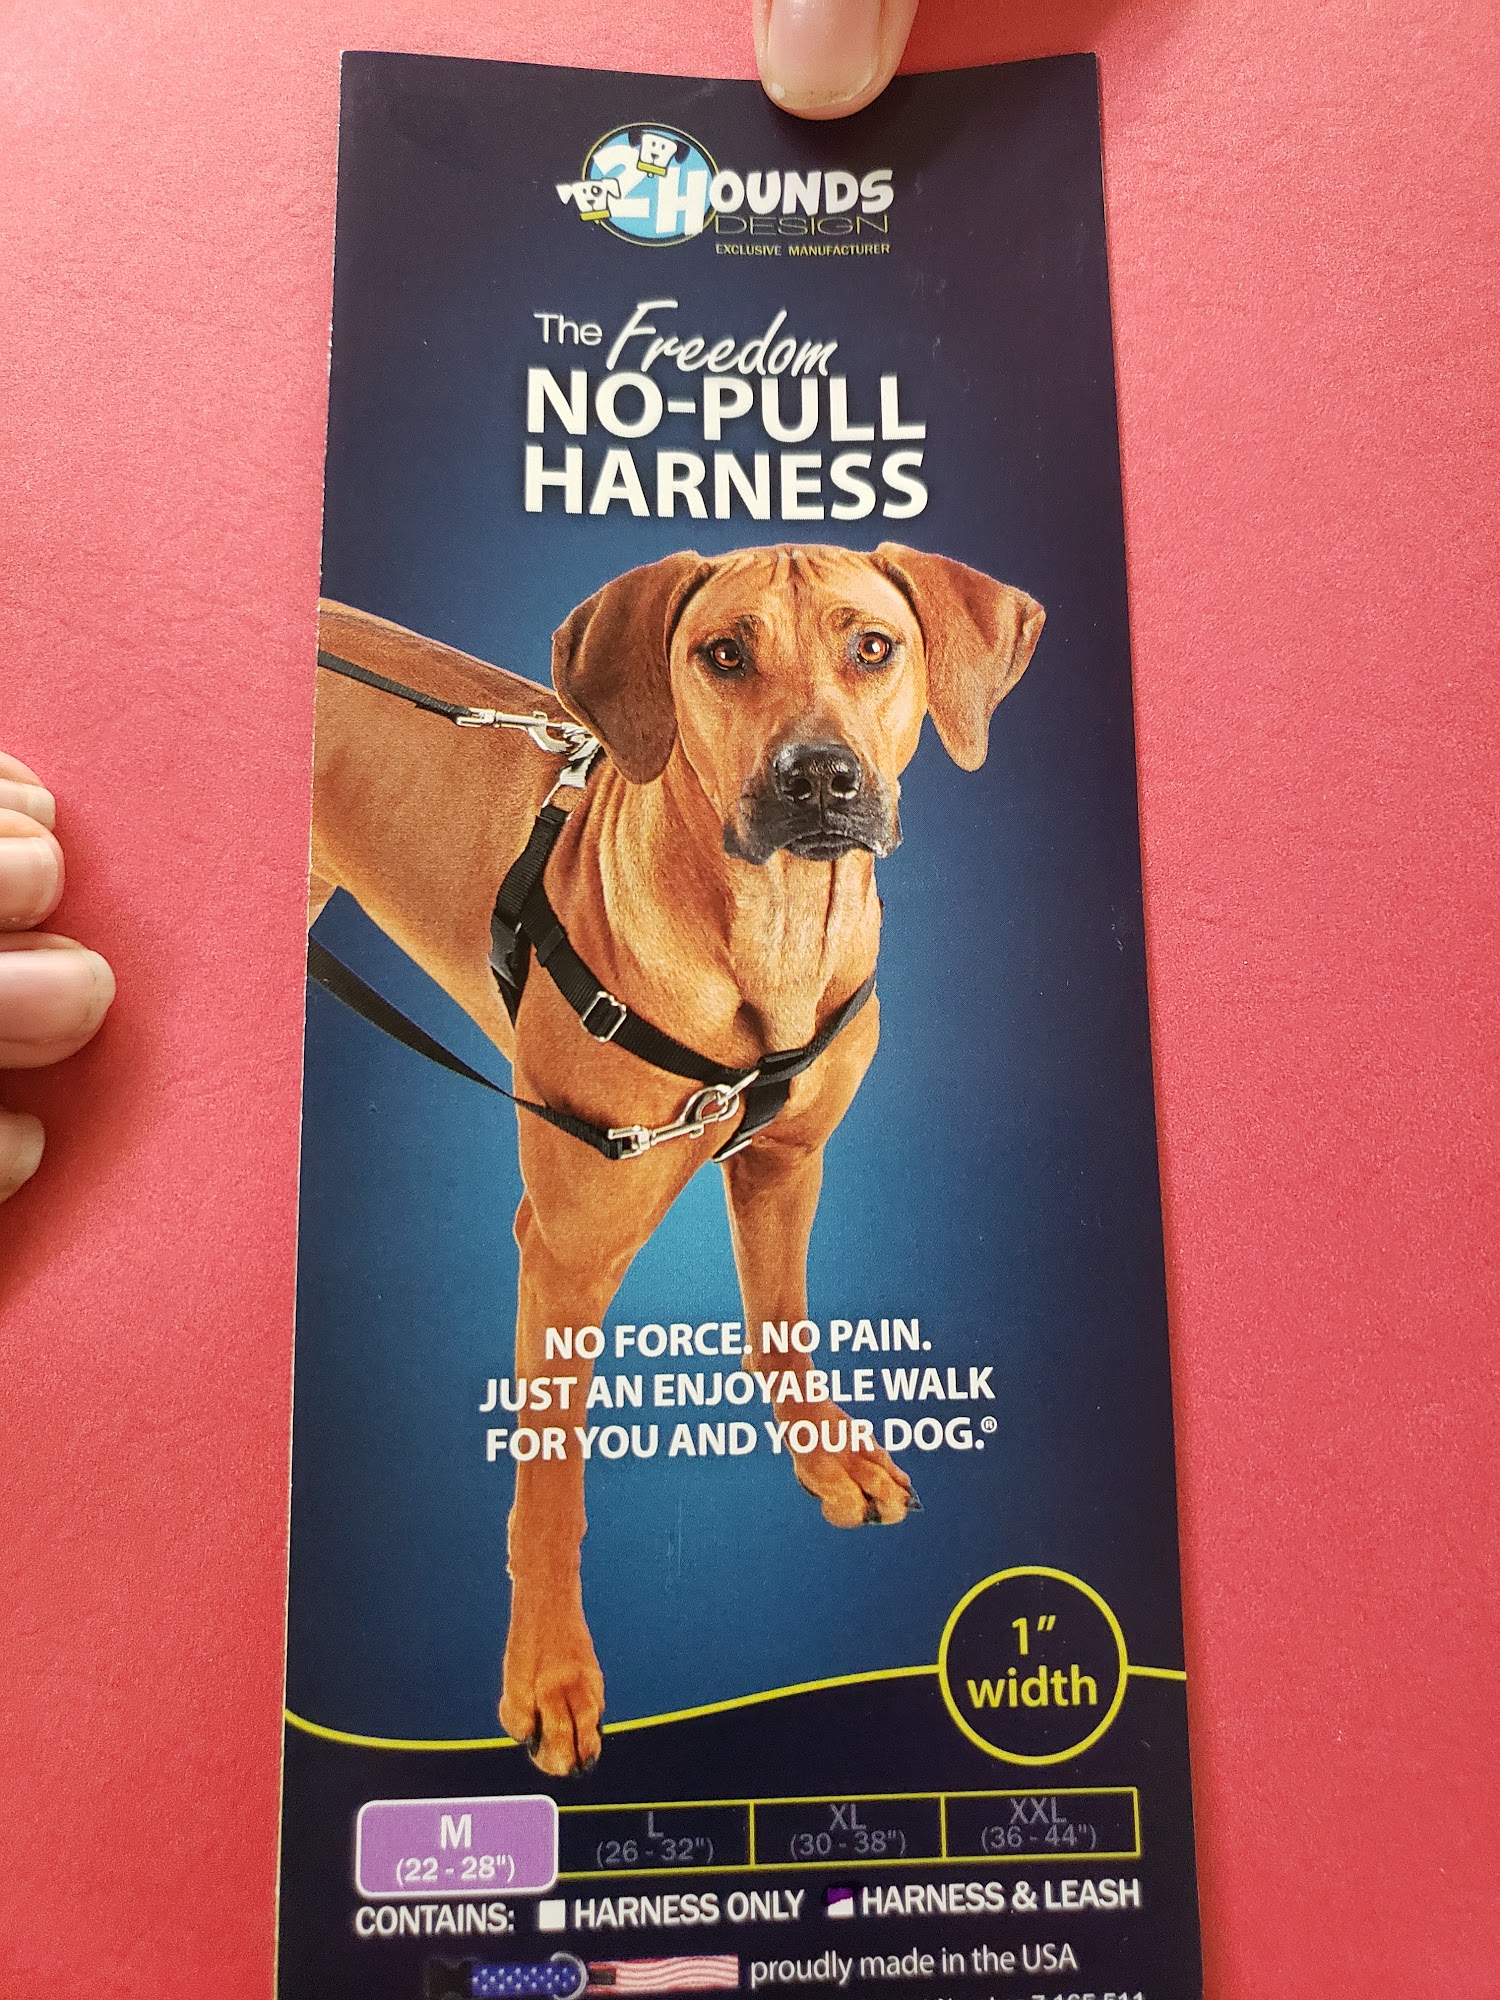 Manners N' More Dog Traning